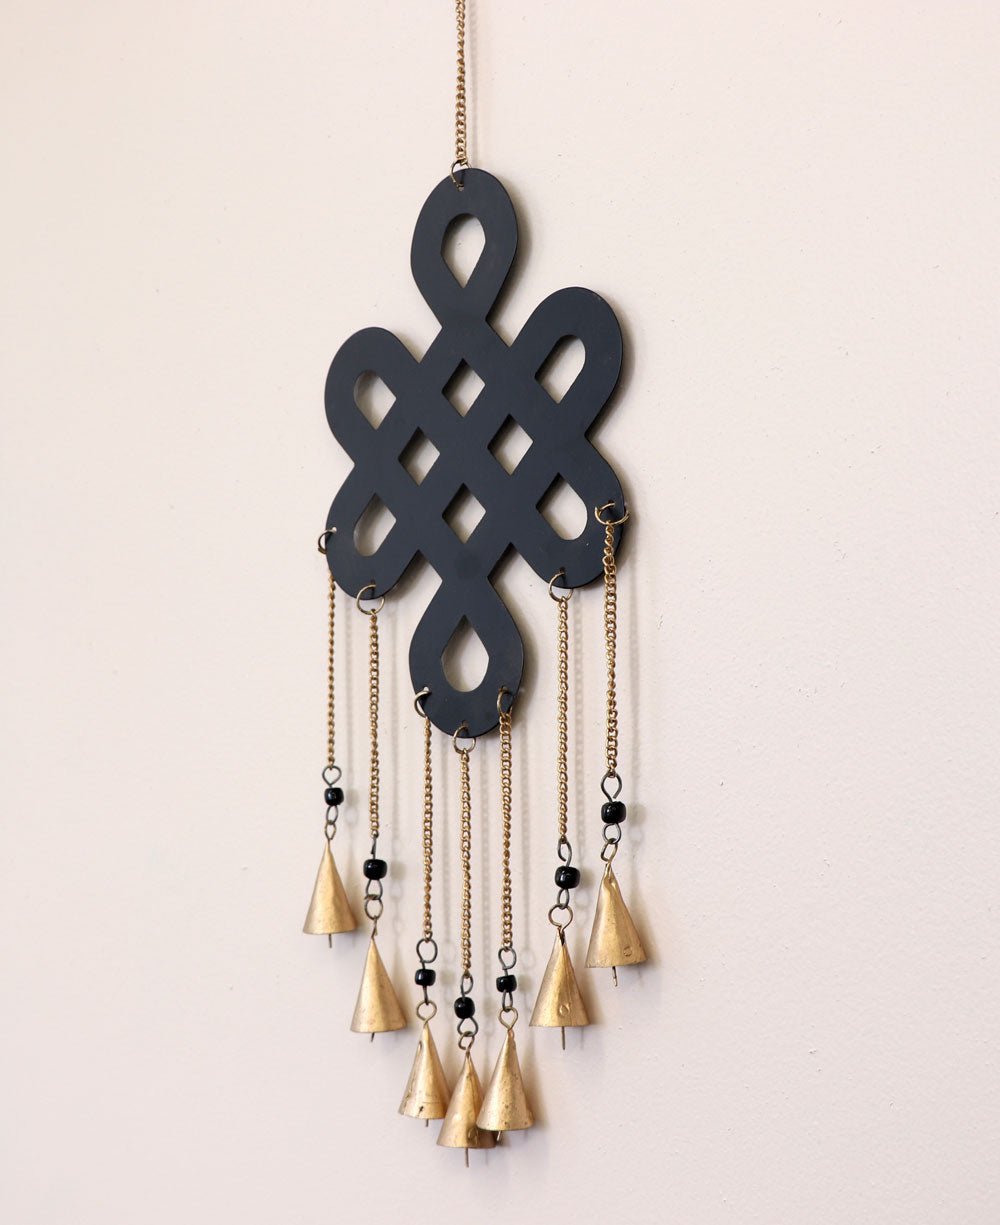 Fairtrade Endless Knot Chime Metal Wall Hanging - Wind Chimes